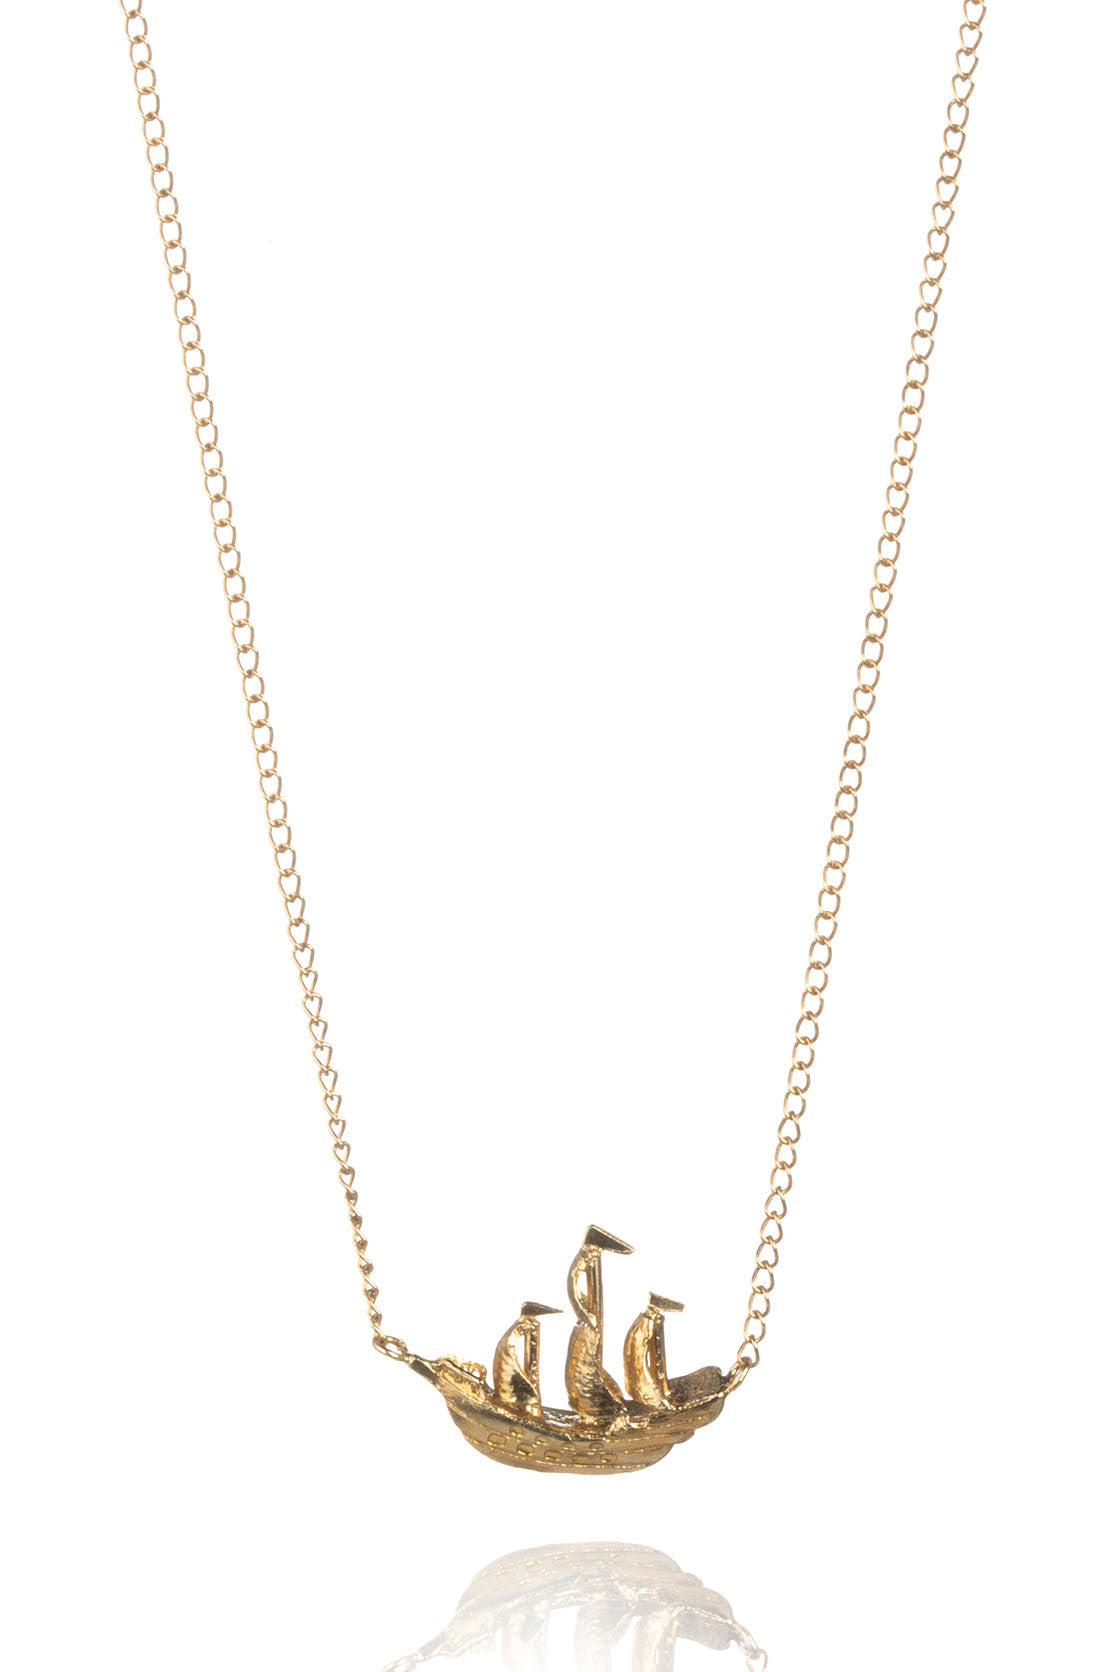 22ct handmade gold galleon necklace